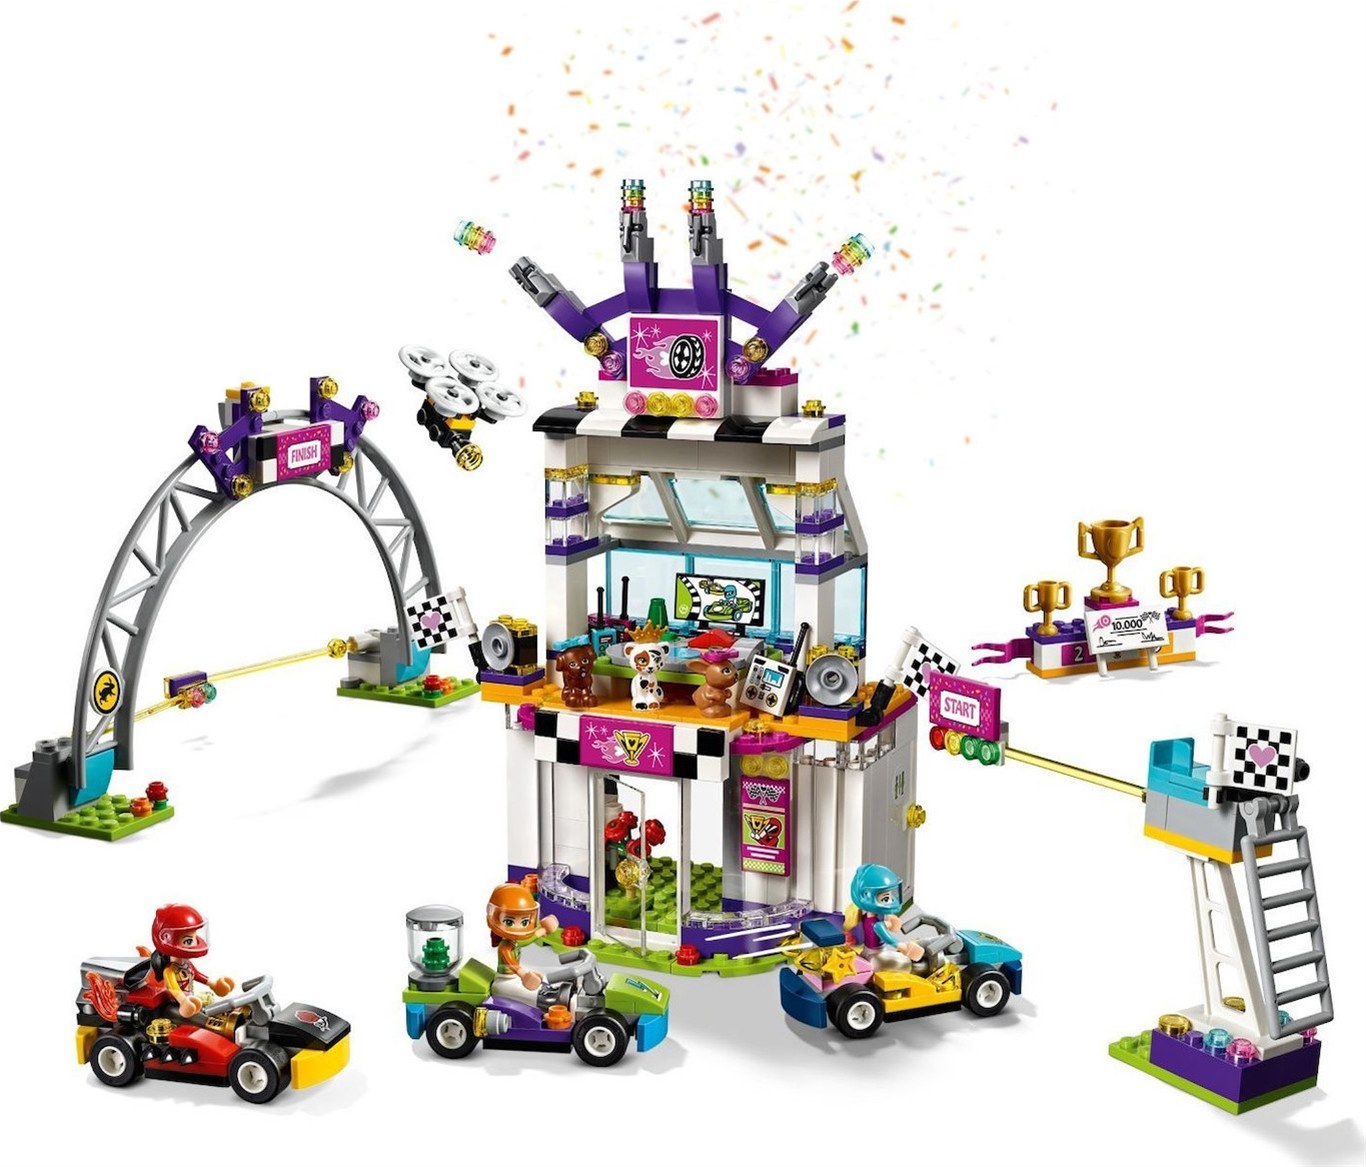 Lego Friends: The Big Race Day 2